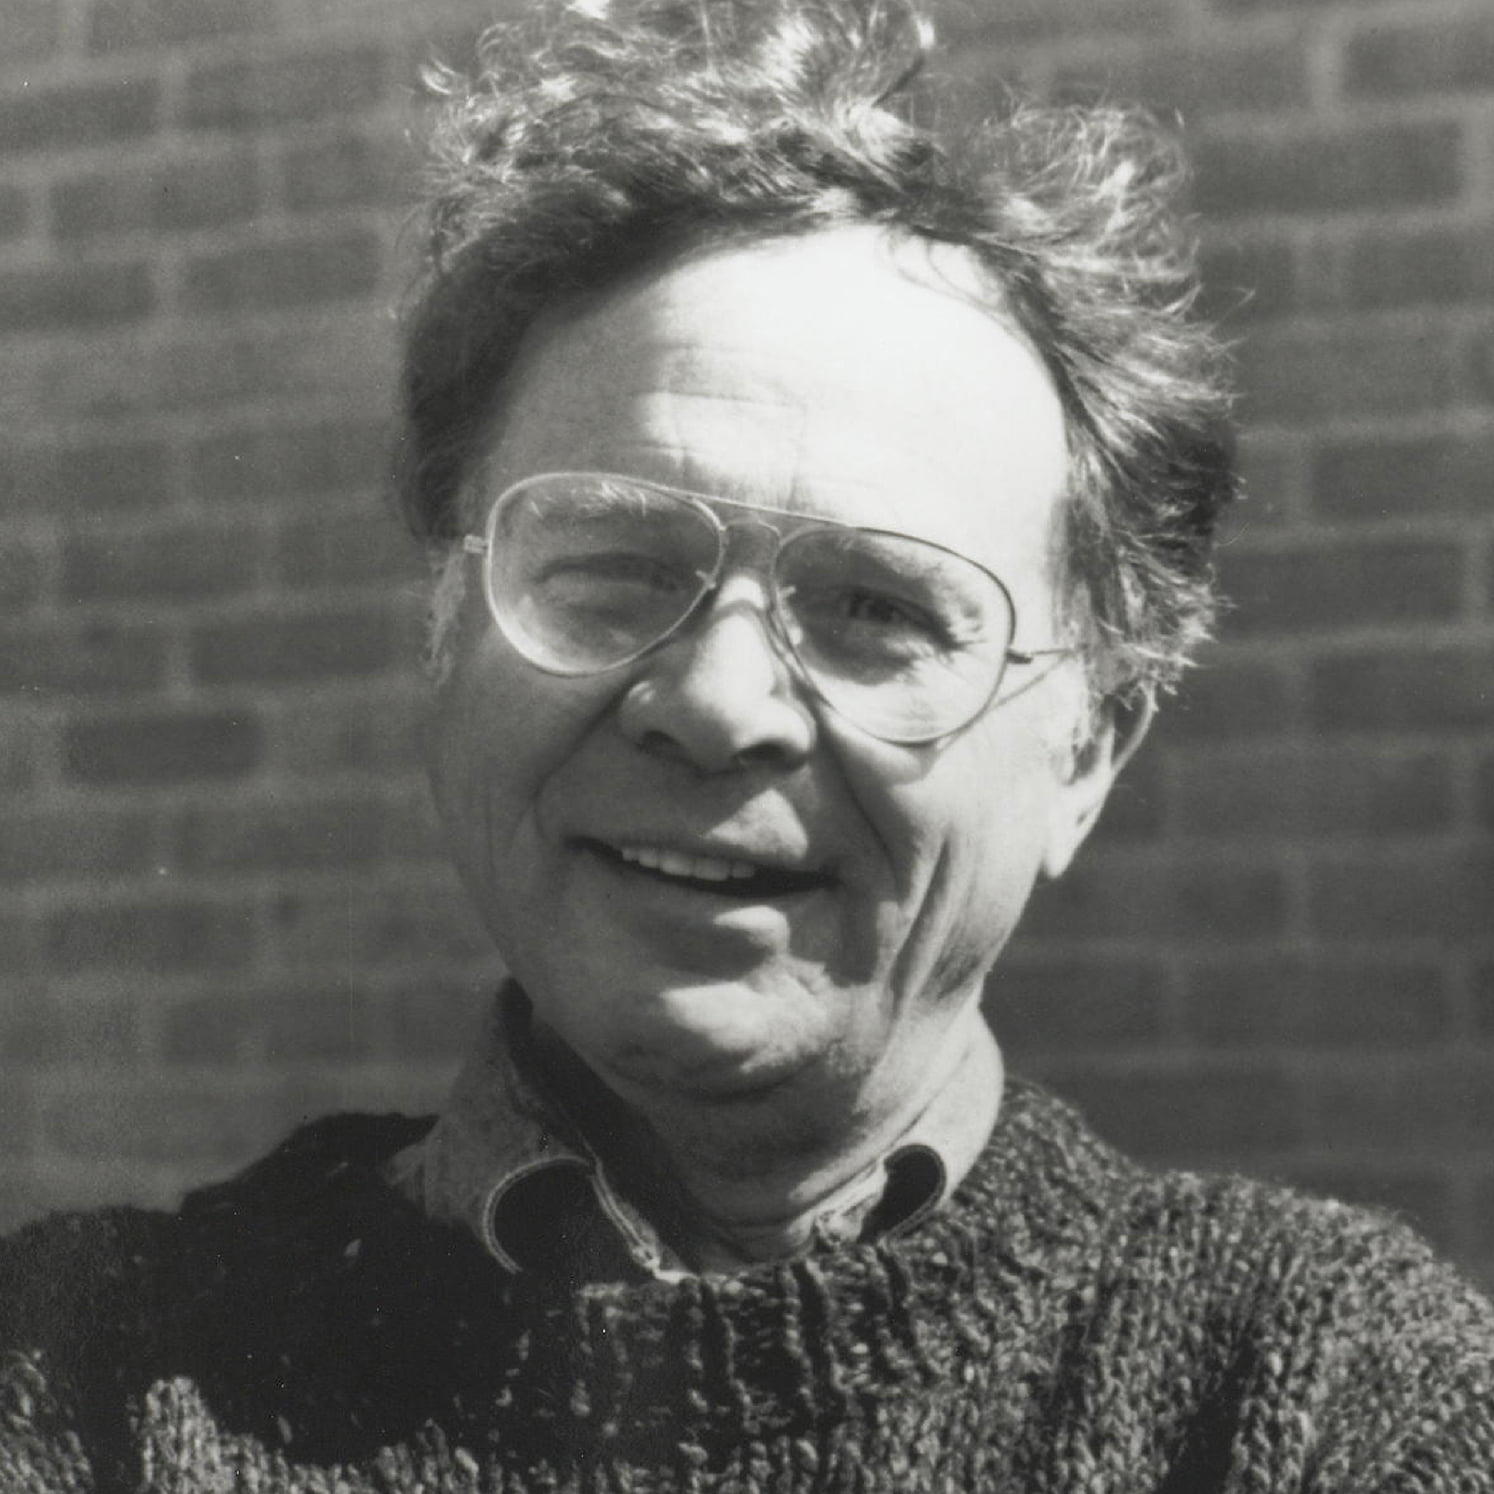 Dr. Wallace S. Broecker